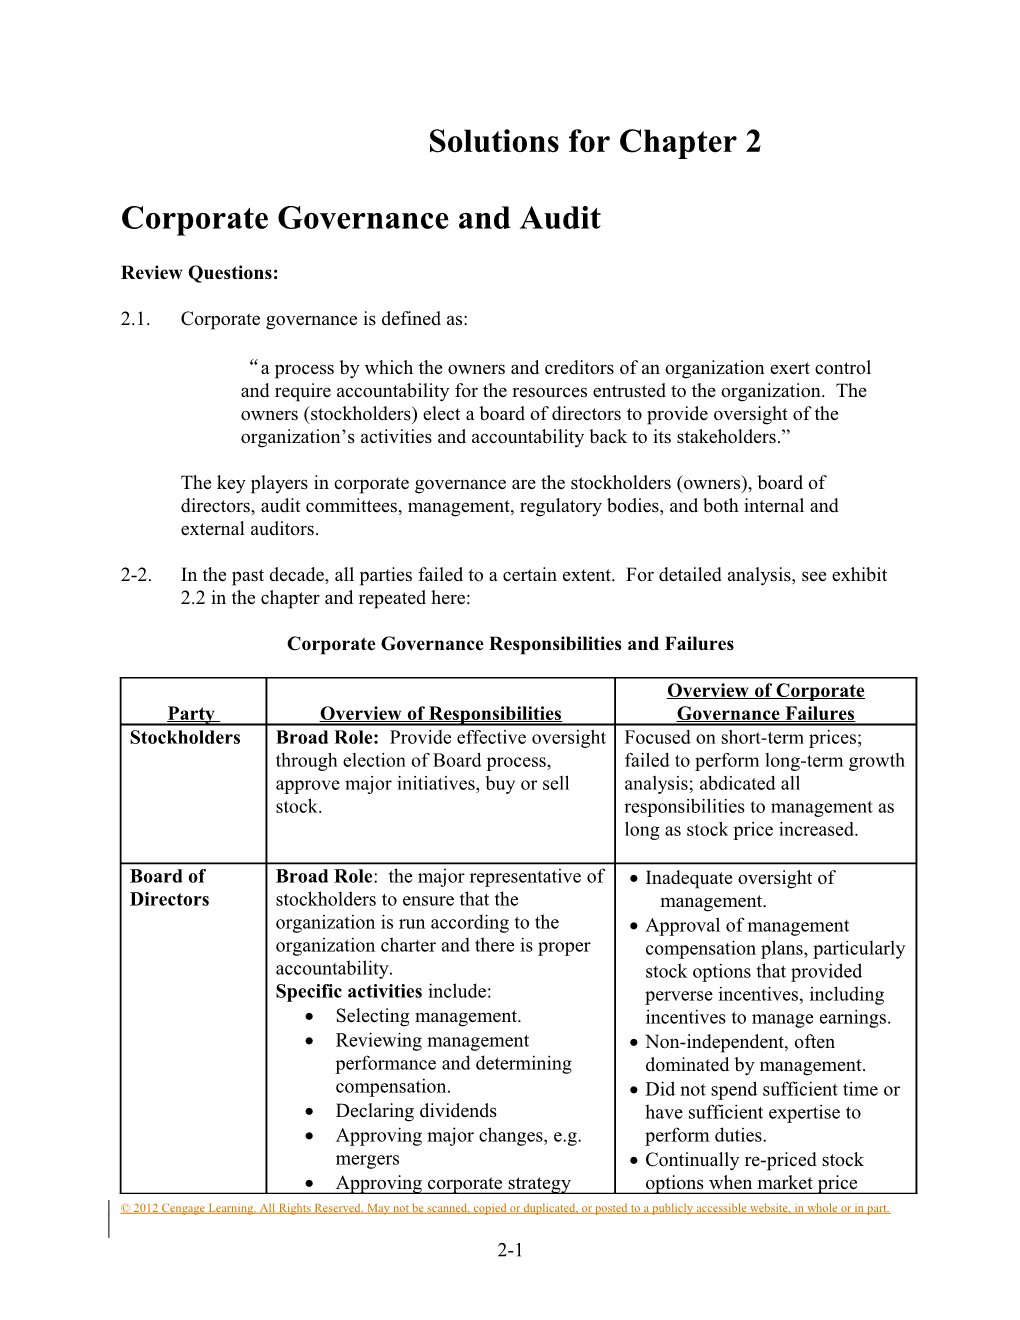 Corporate Governance and Audit